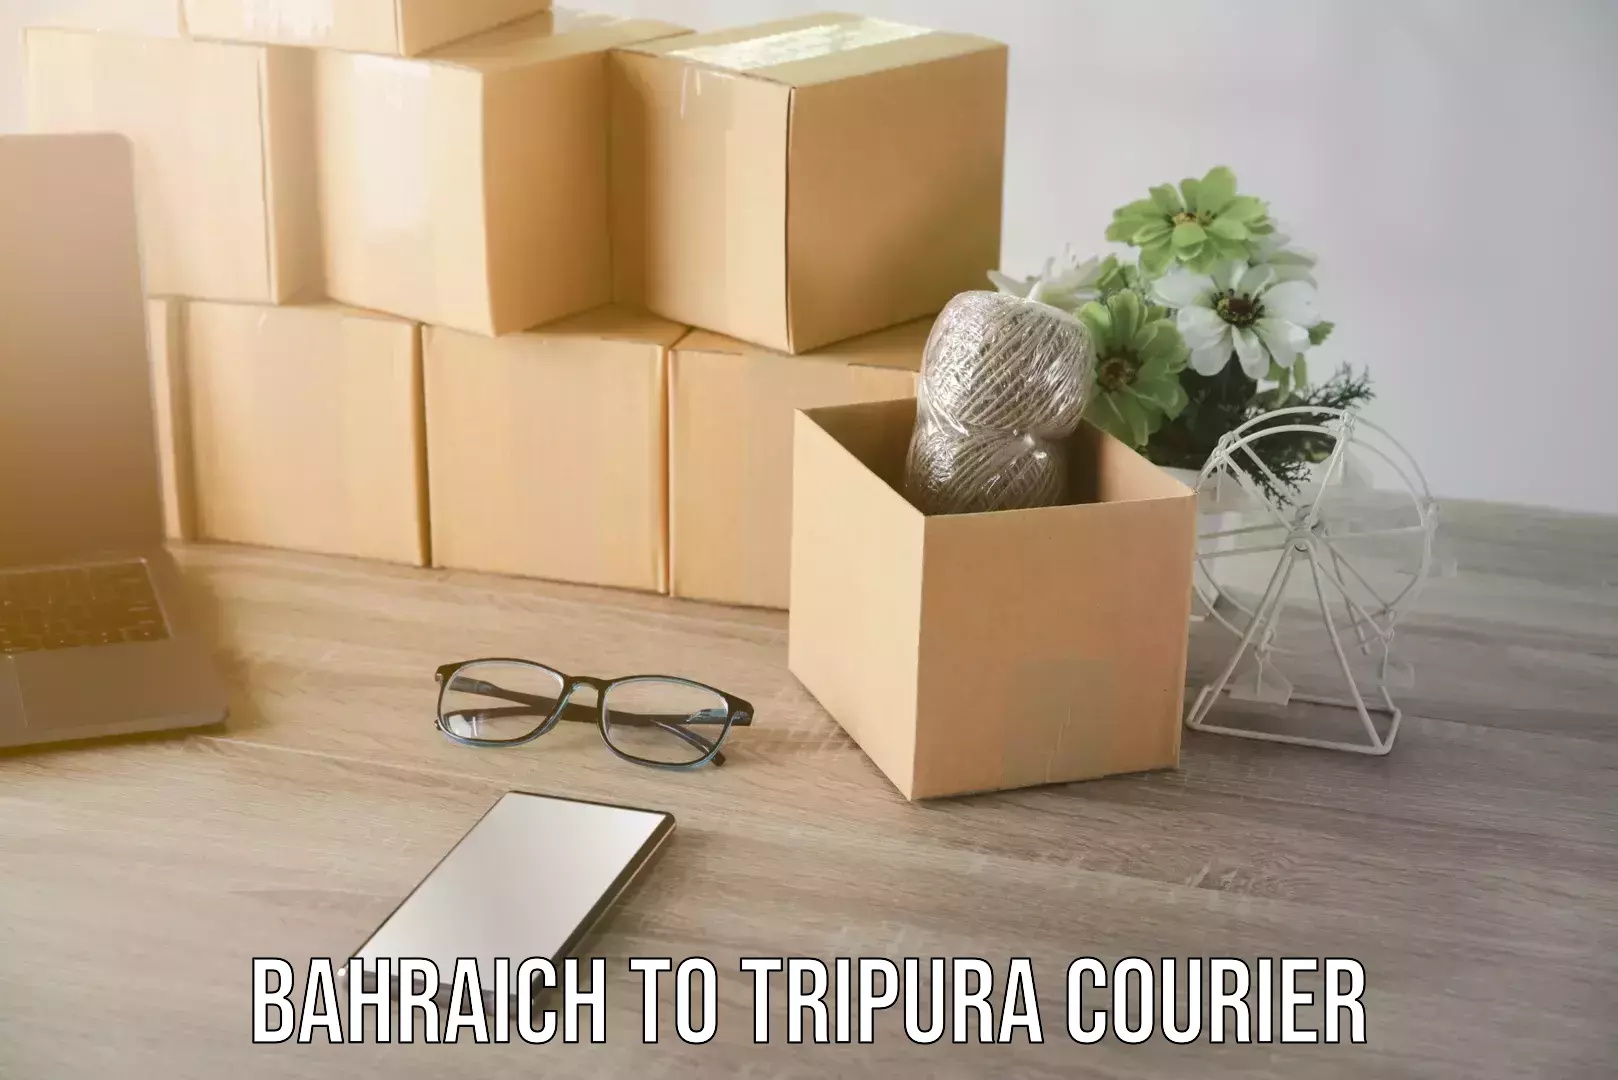 Delivery service partnership Bahraich to Tripura